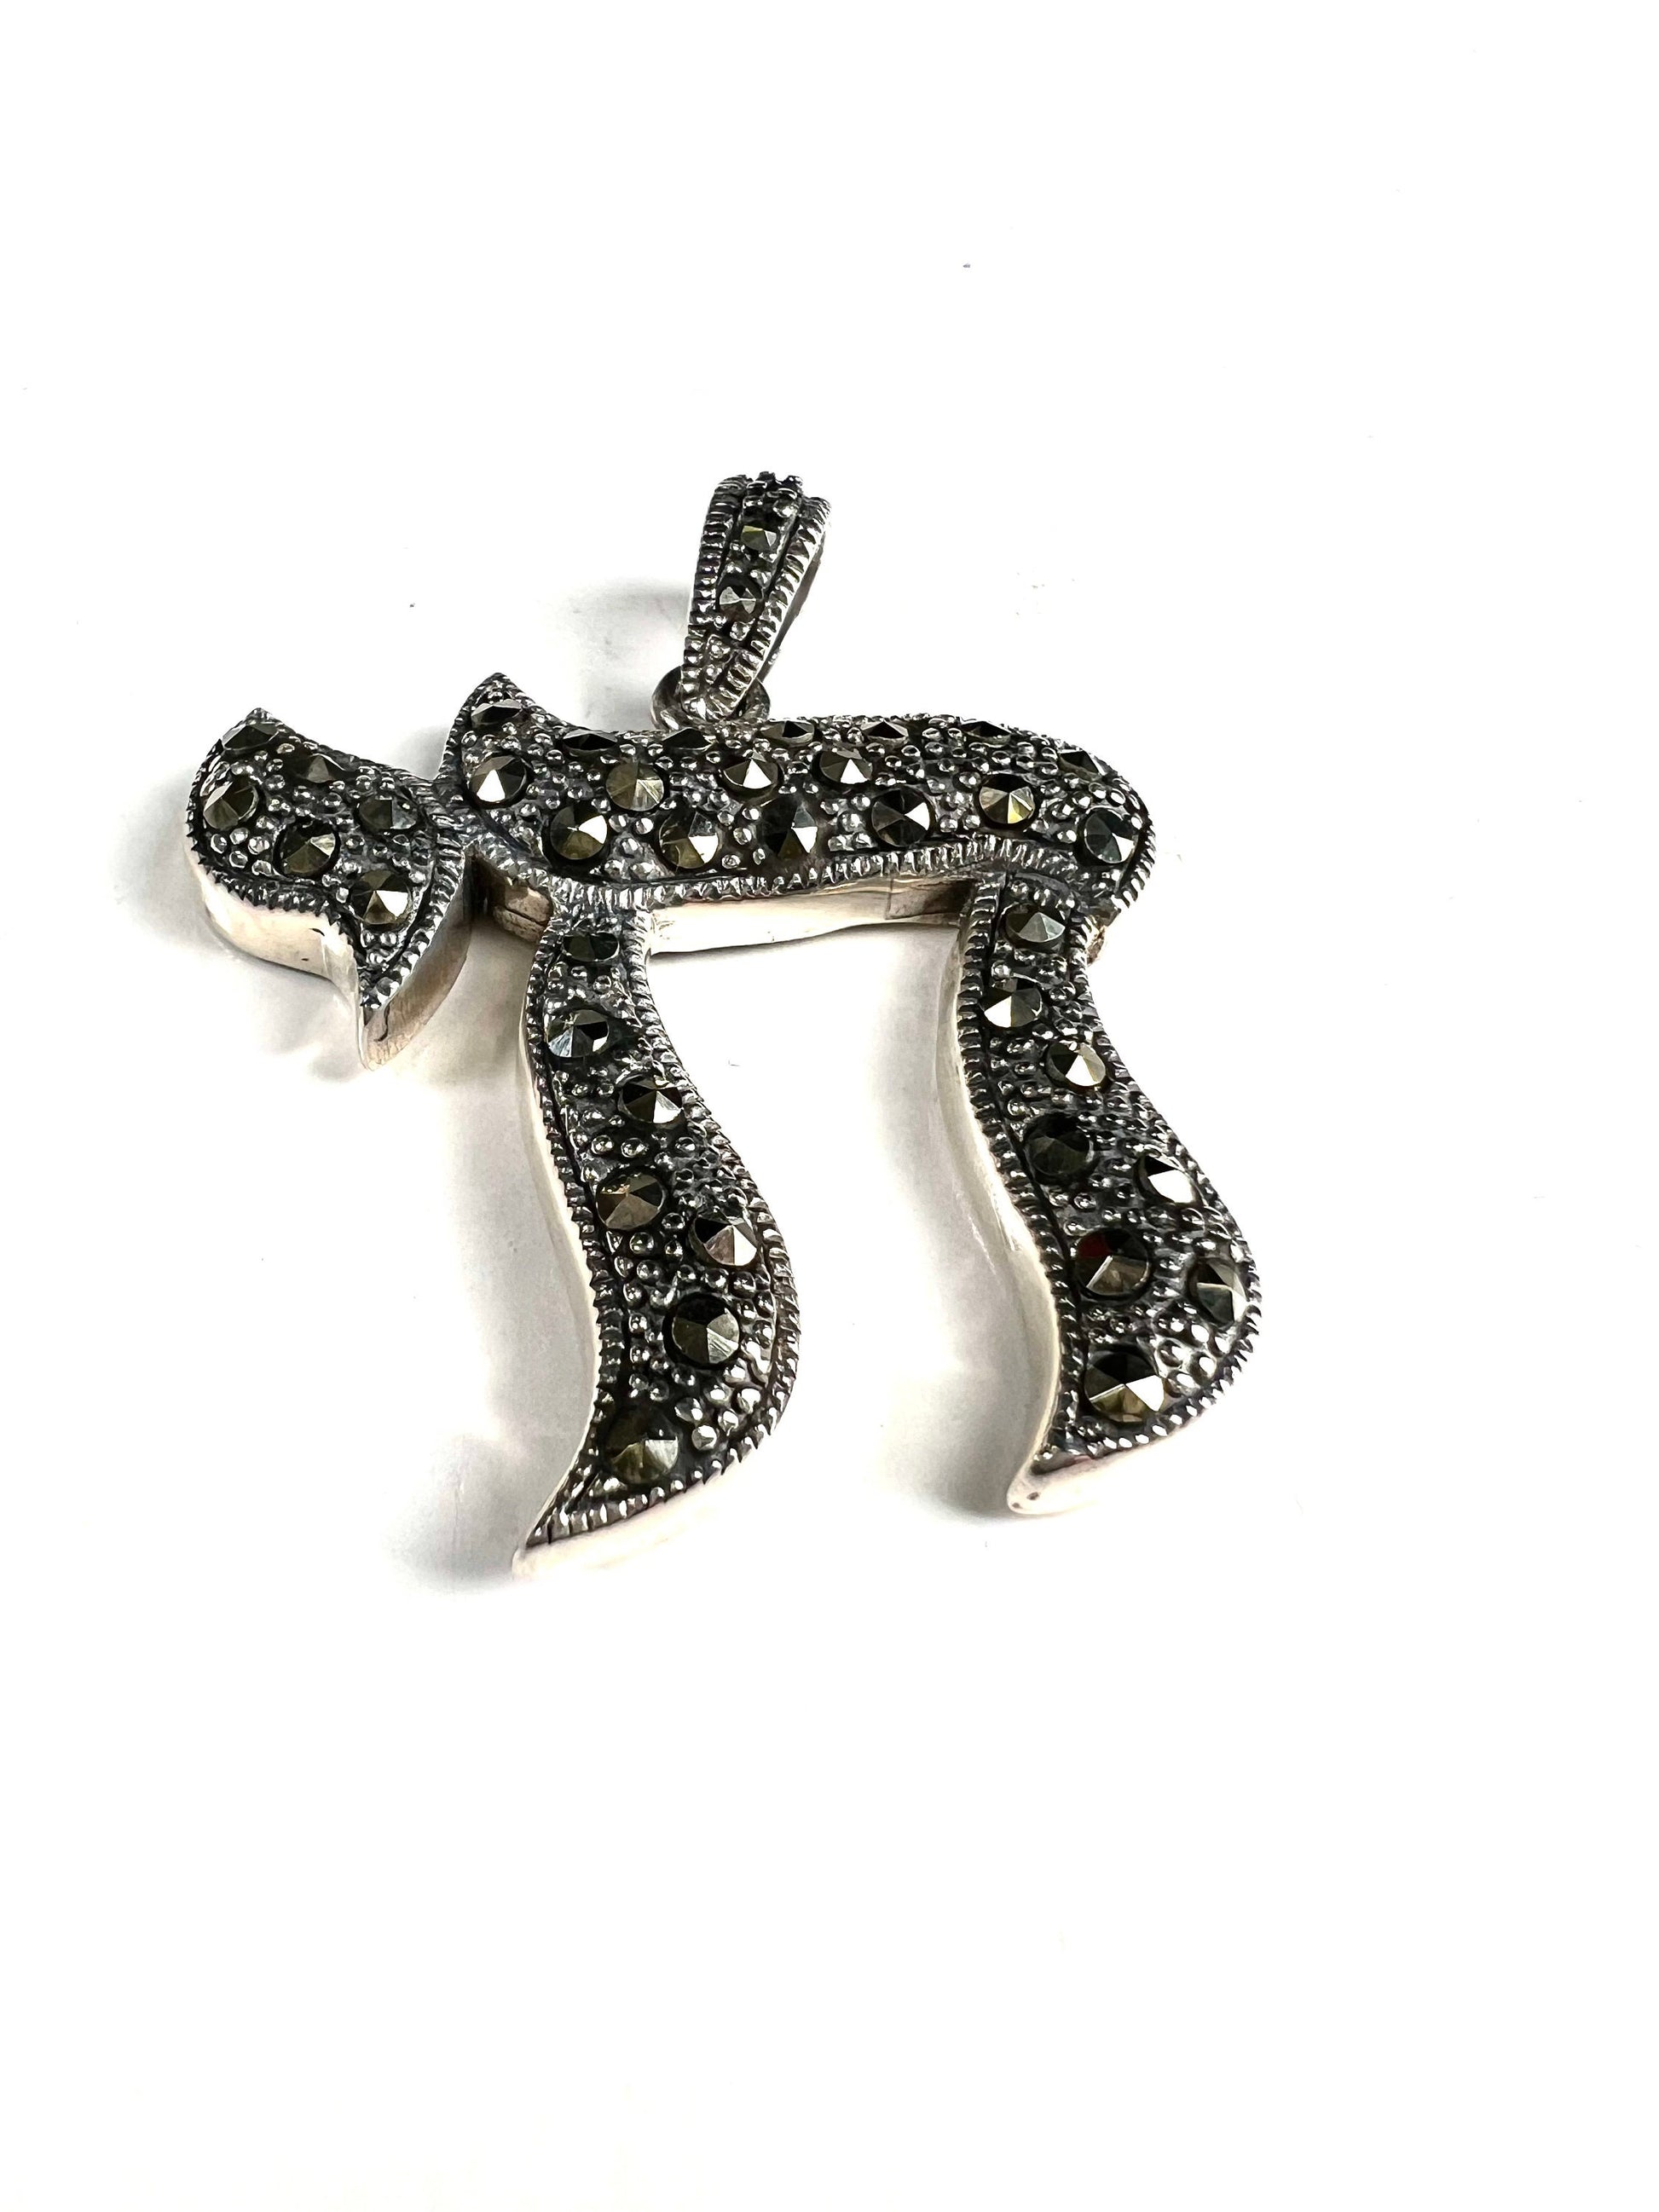 Vintage Marcasite 925 Sterling Silver Cahi Pendant with 925 Sterling Silver snake Chain necklace, 925 stamped, In Life, good luck